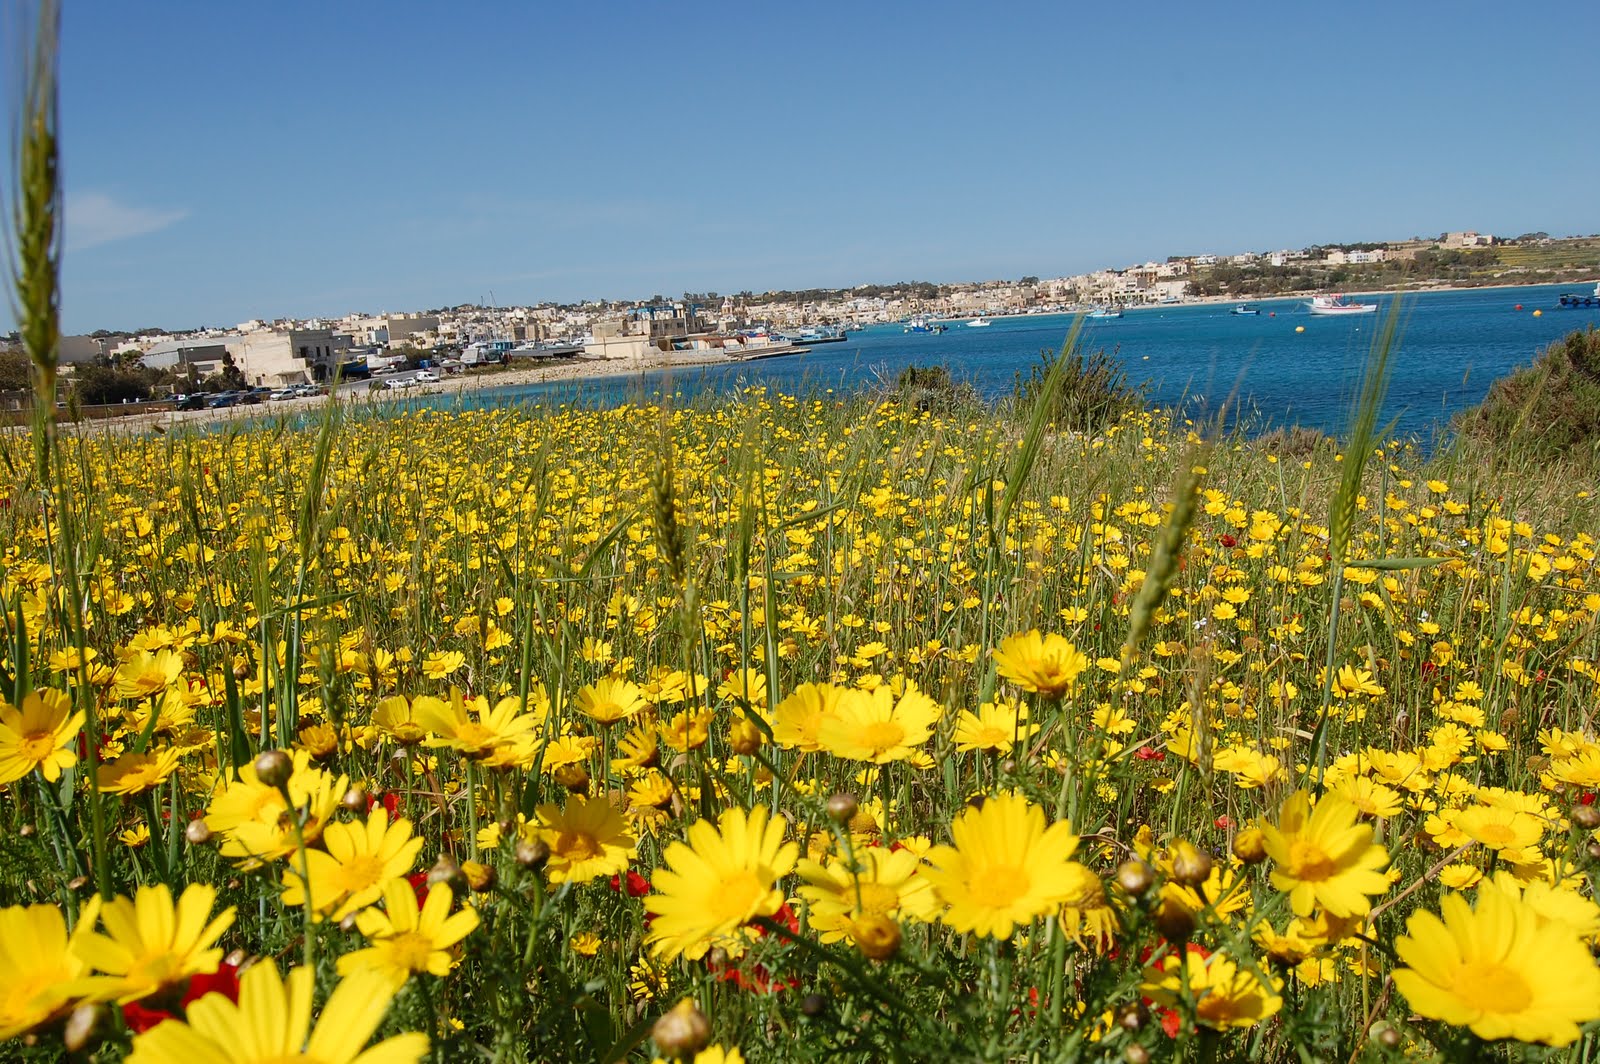 Spring is coming to Malta